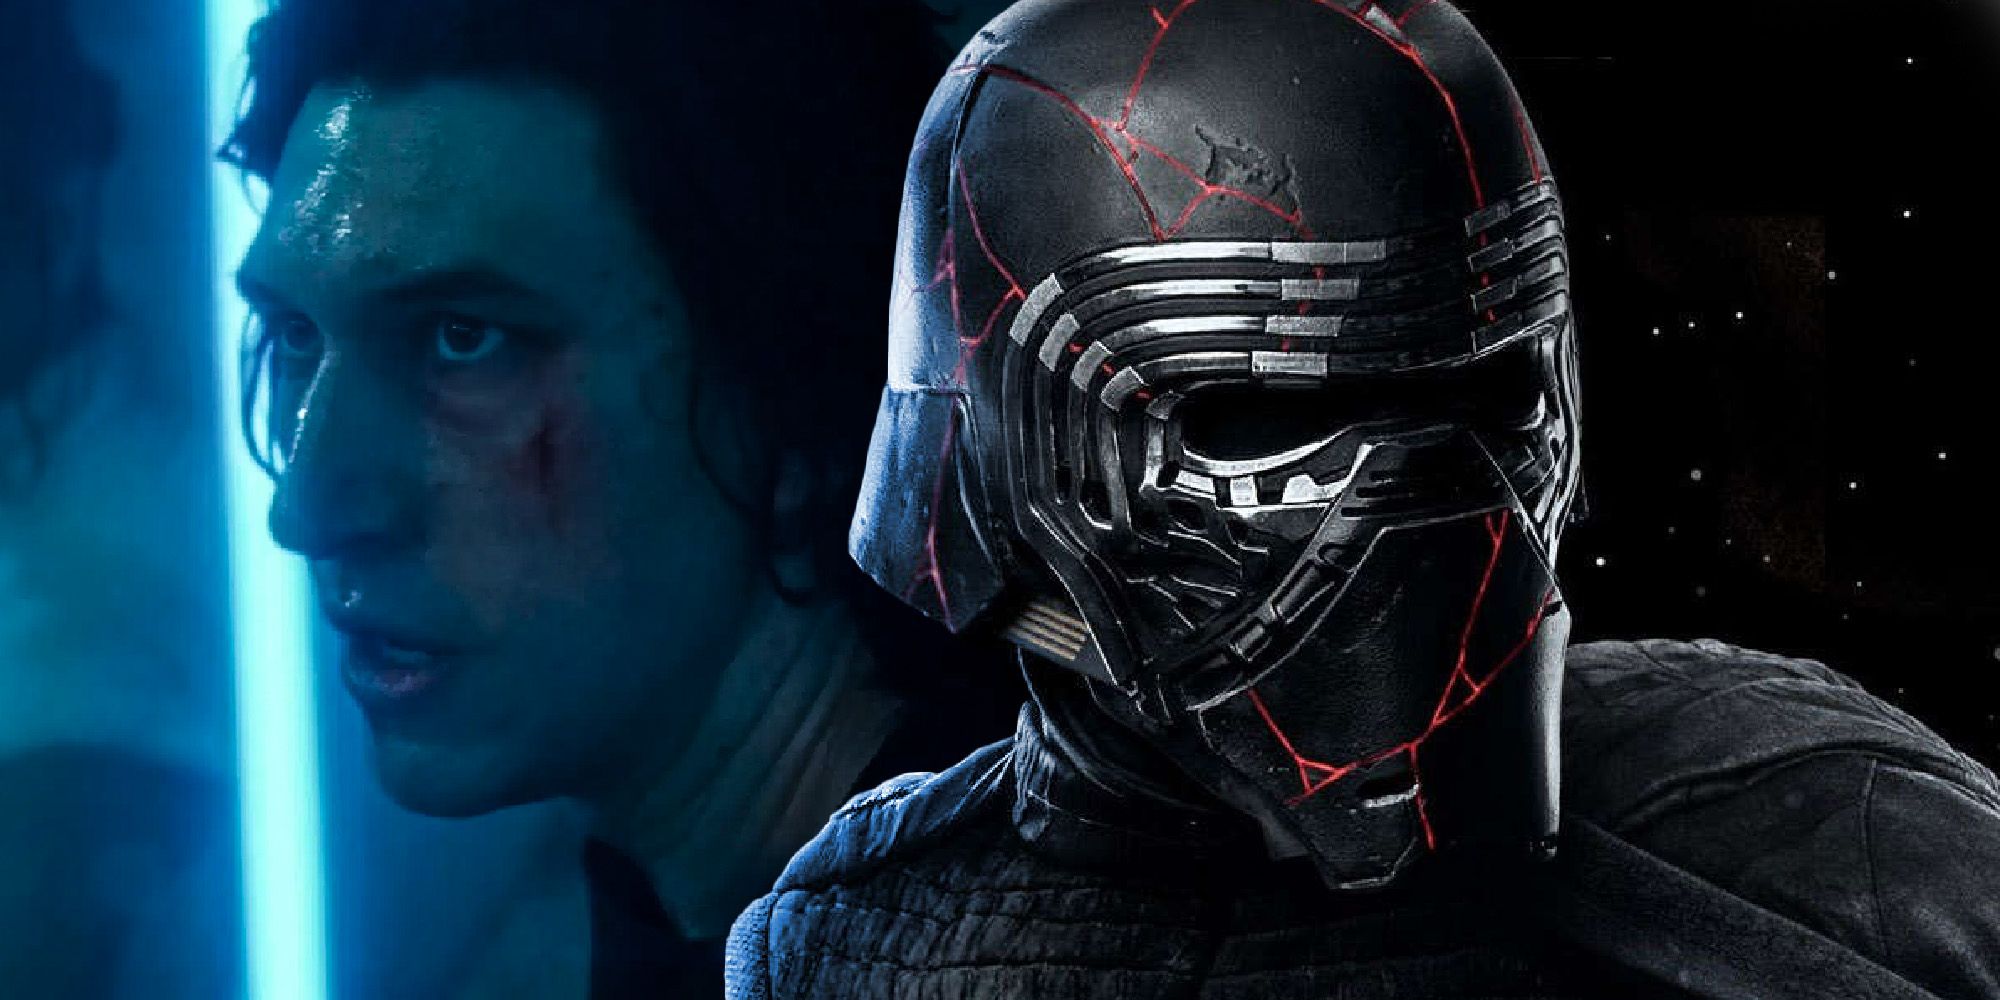 The Rise of Skywalker: How Powerful Ben Solo Is Compared To Kylo Ren